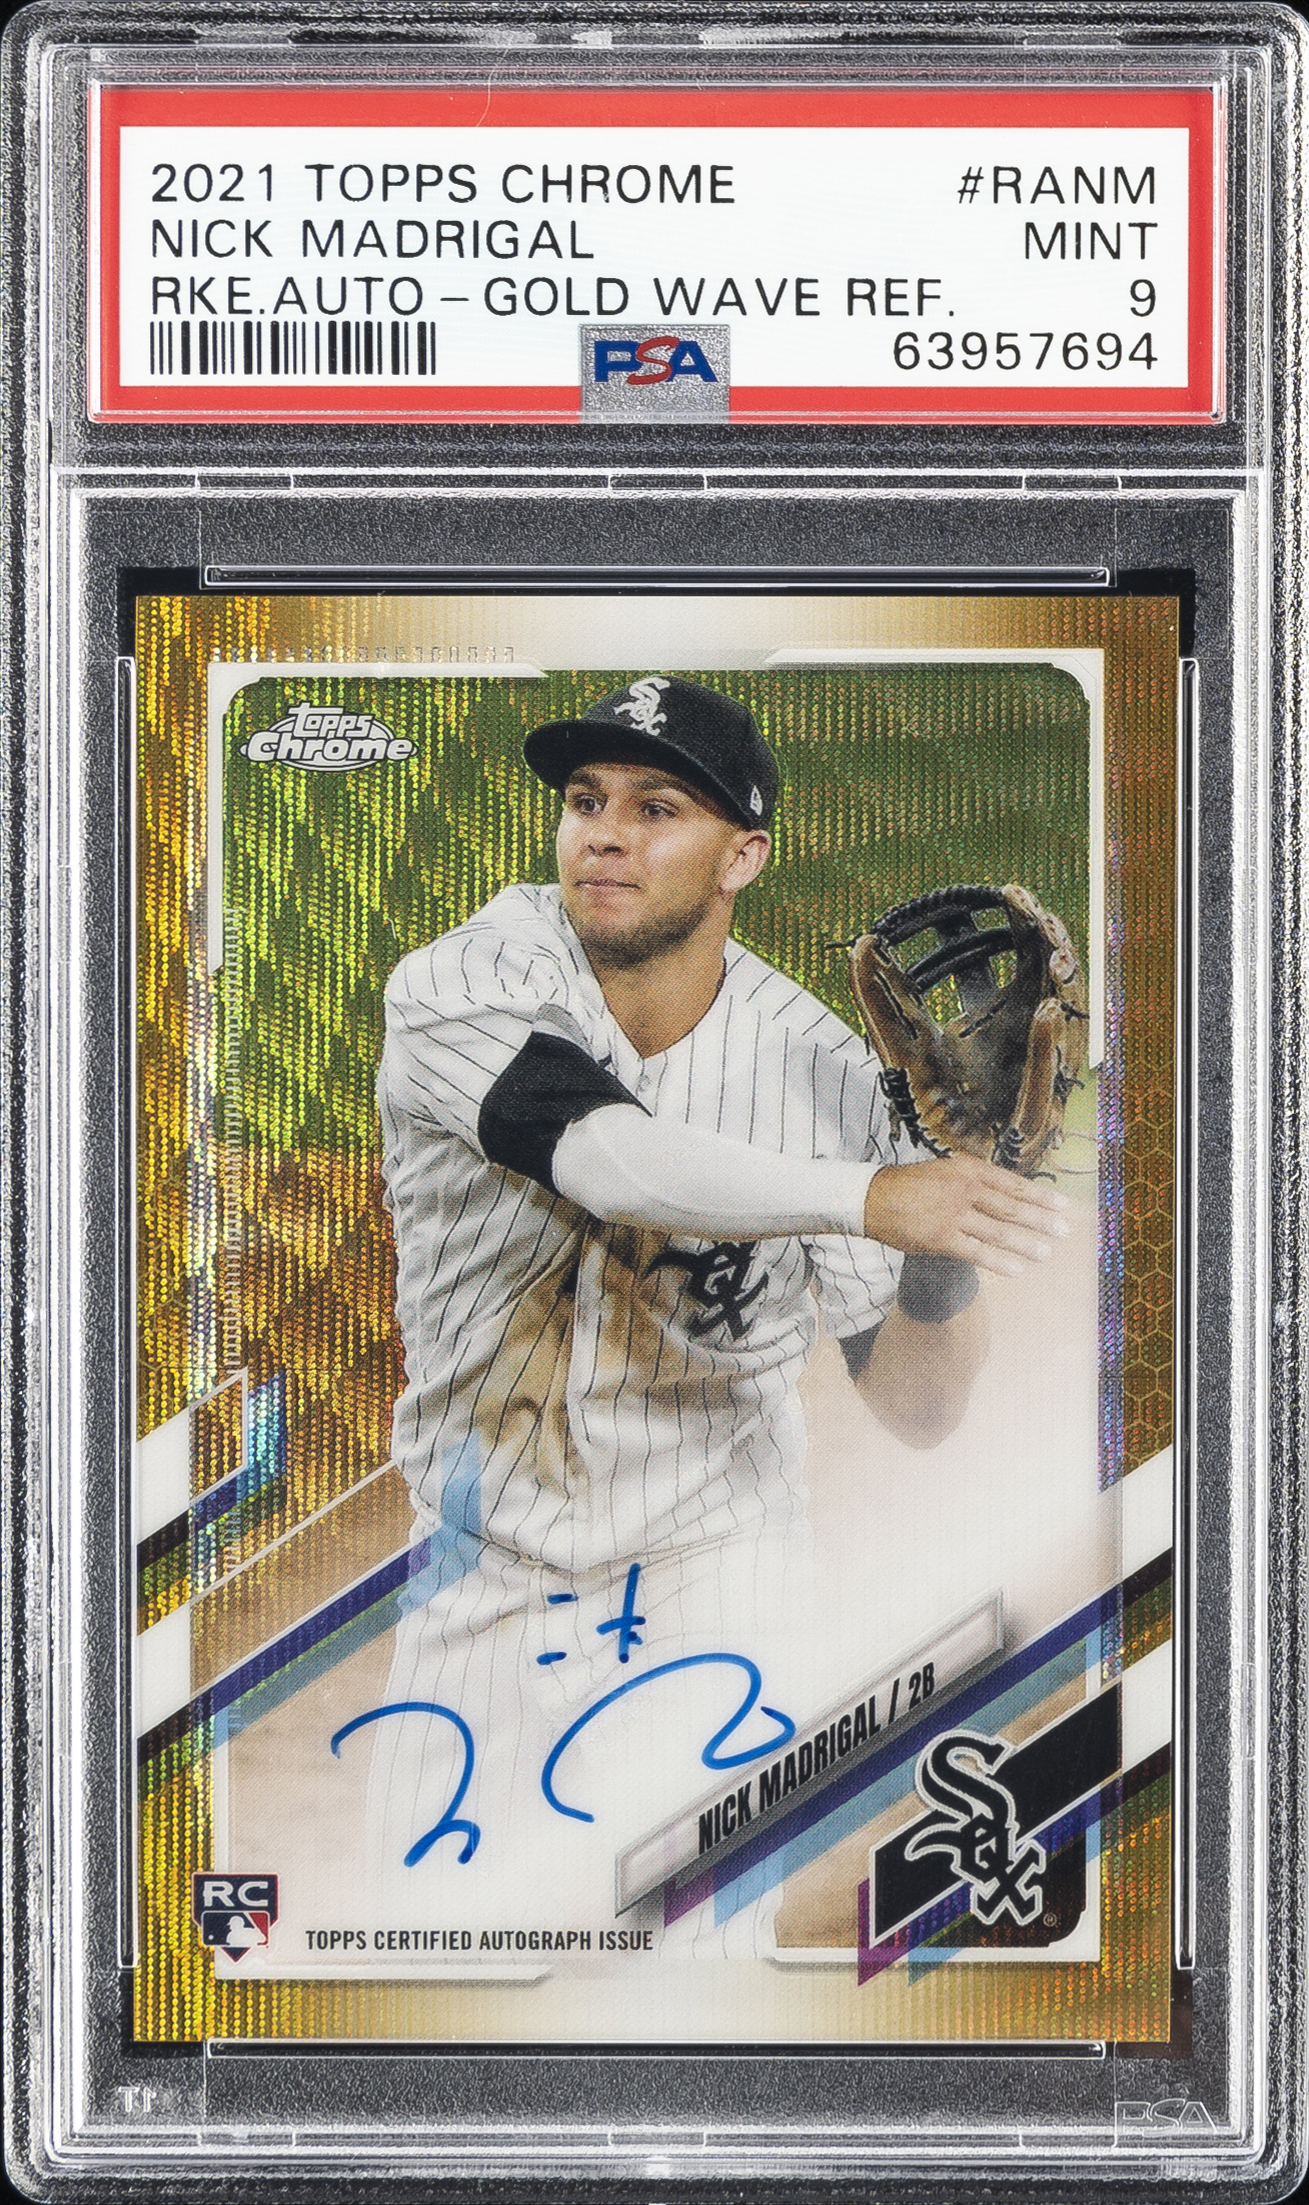 2021 Topps Chrome Rookie Autographs Gold Wave Refractor #RA-NM Nick Madrigal Signed Rookie Card (#40/50) – PSA MINT 9